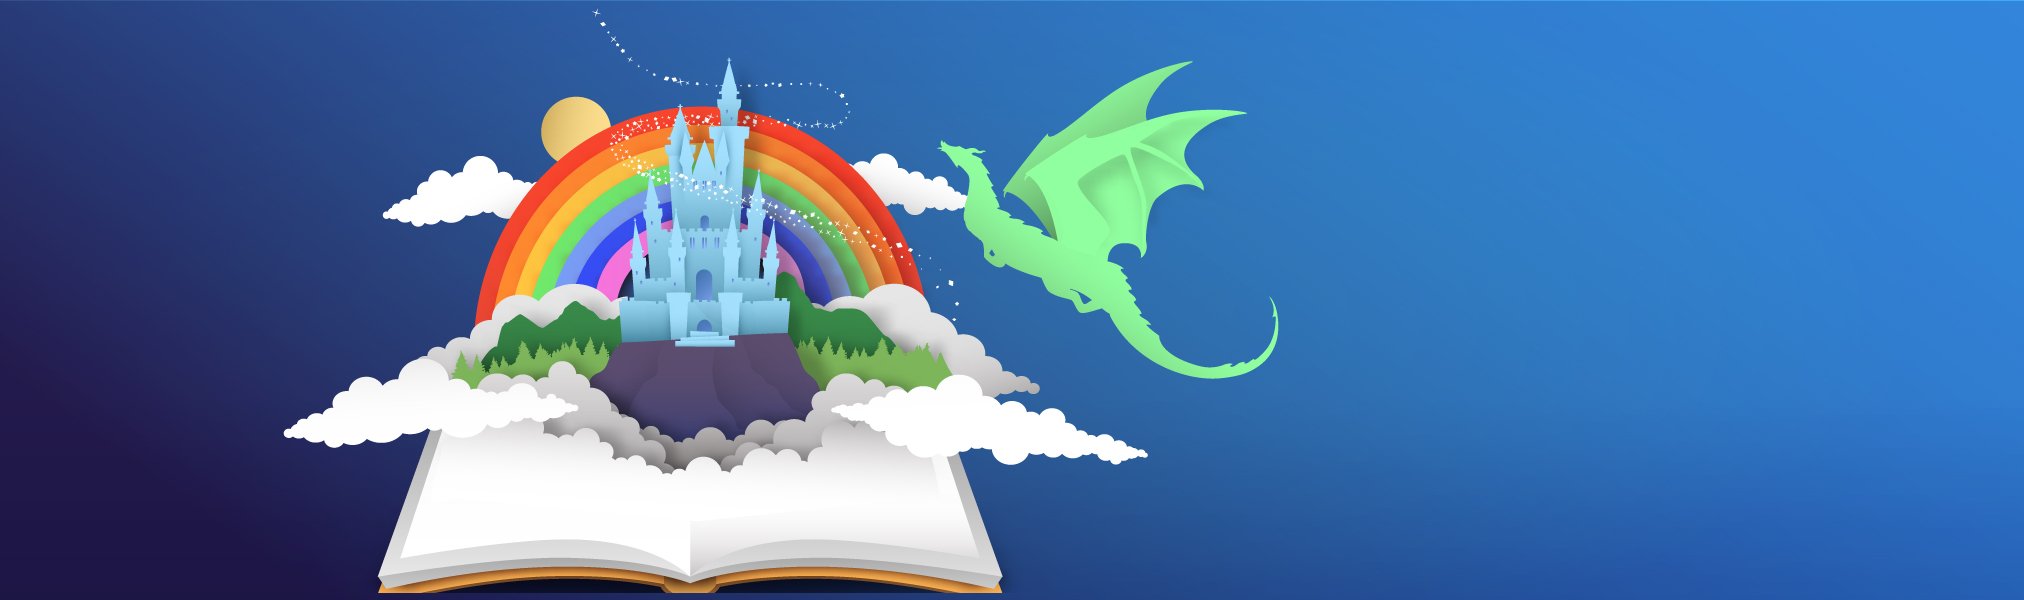 once-upon-a-stem-story-building-stem-skills-with-fairy-tales